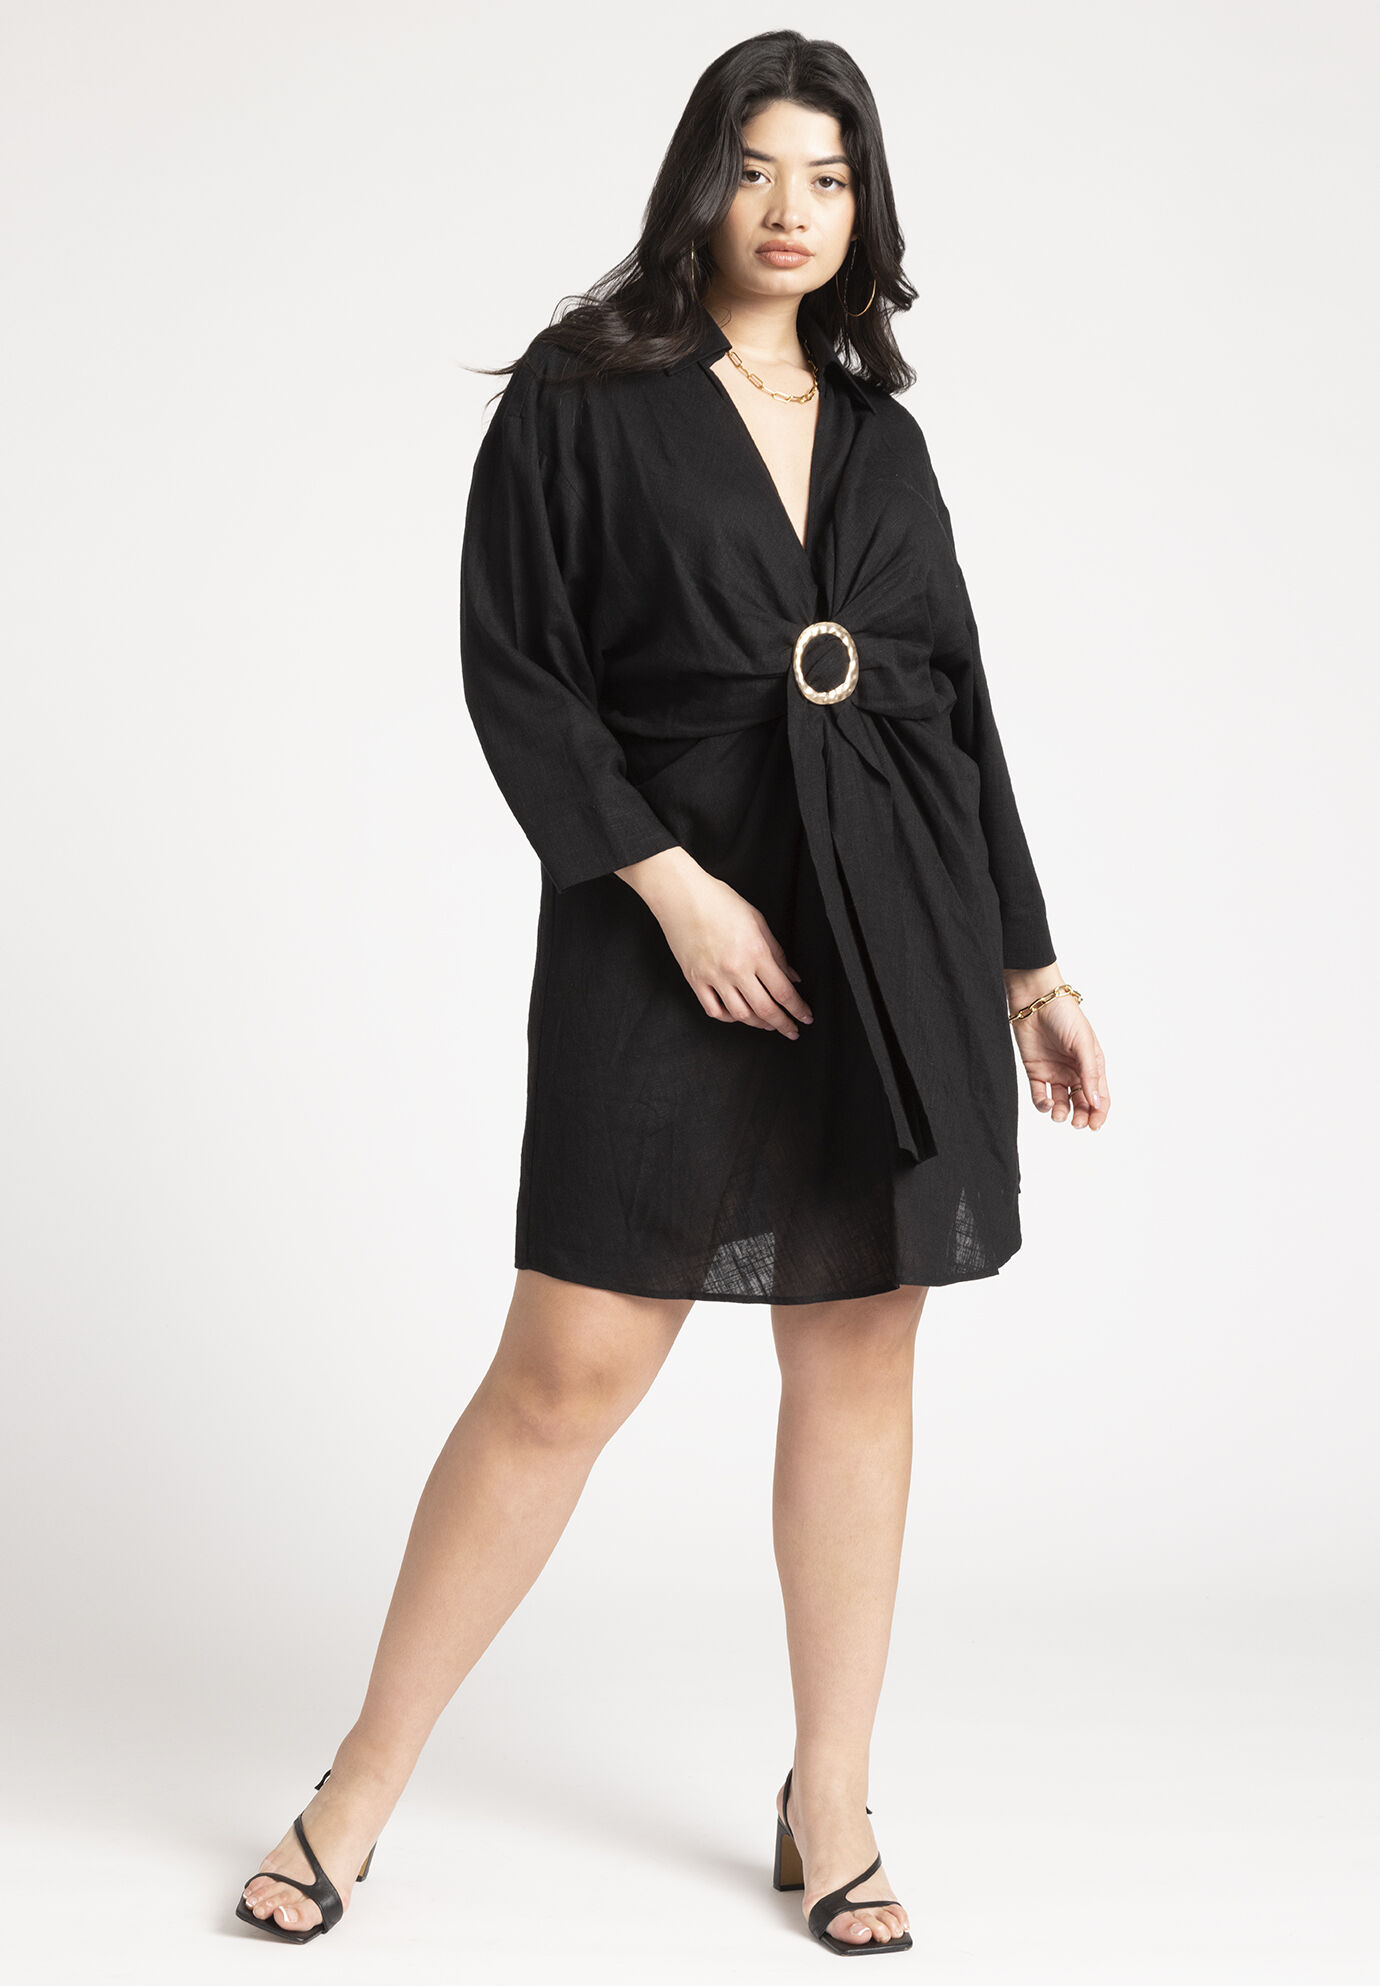 Plus Size Short Dolman Long Sleeves Collared Cover Up/Tunic